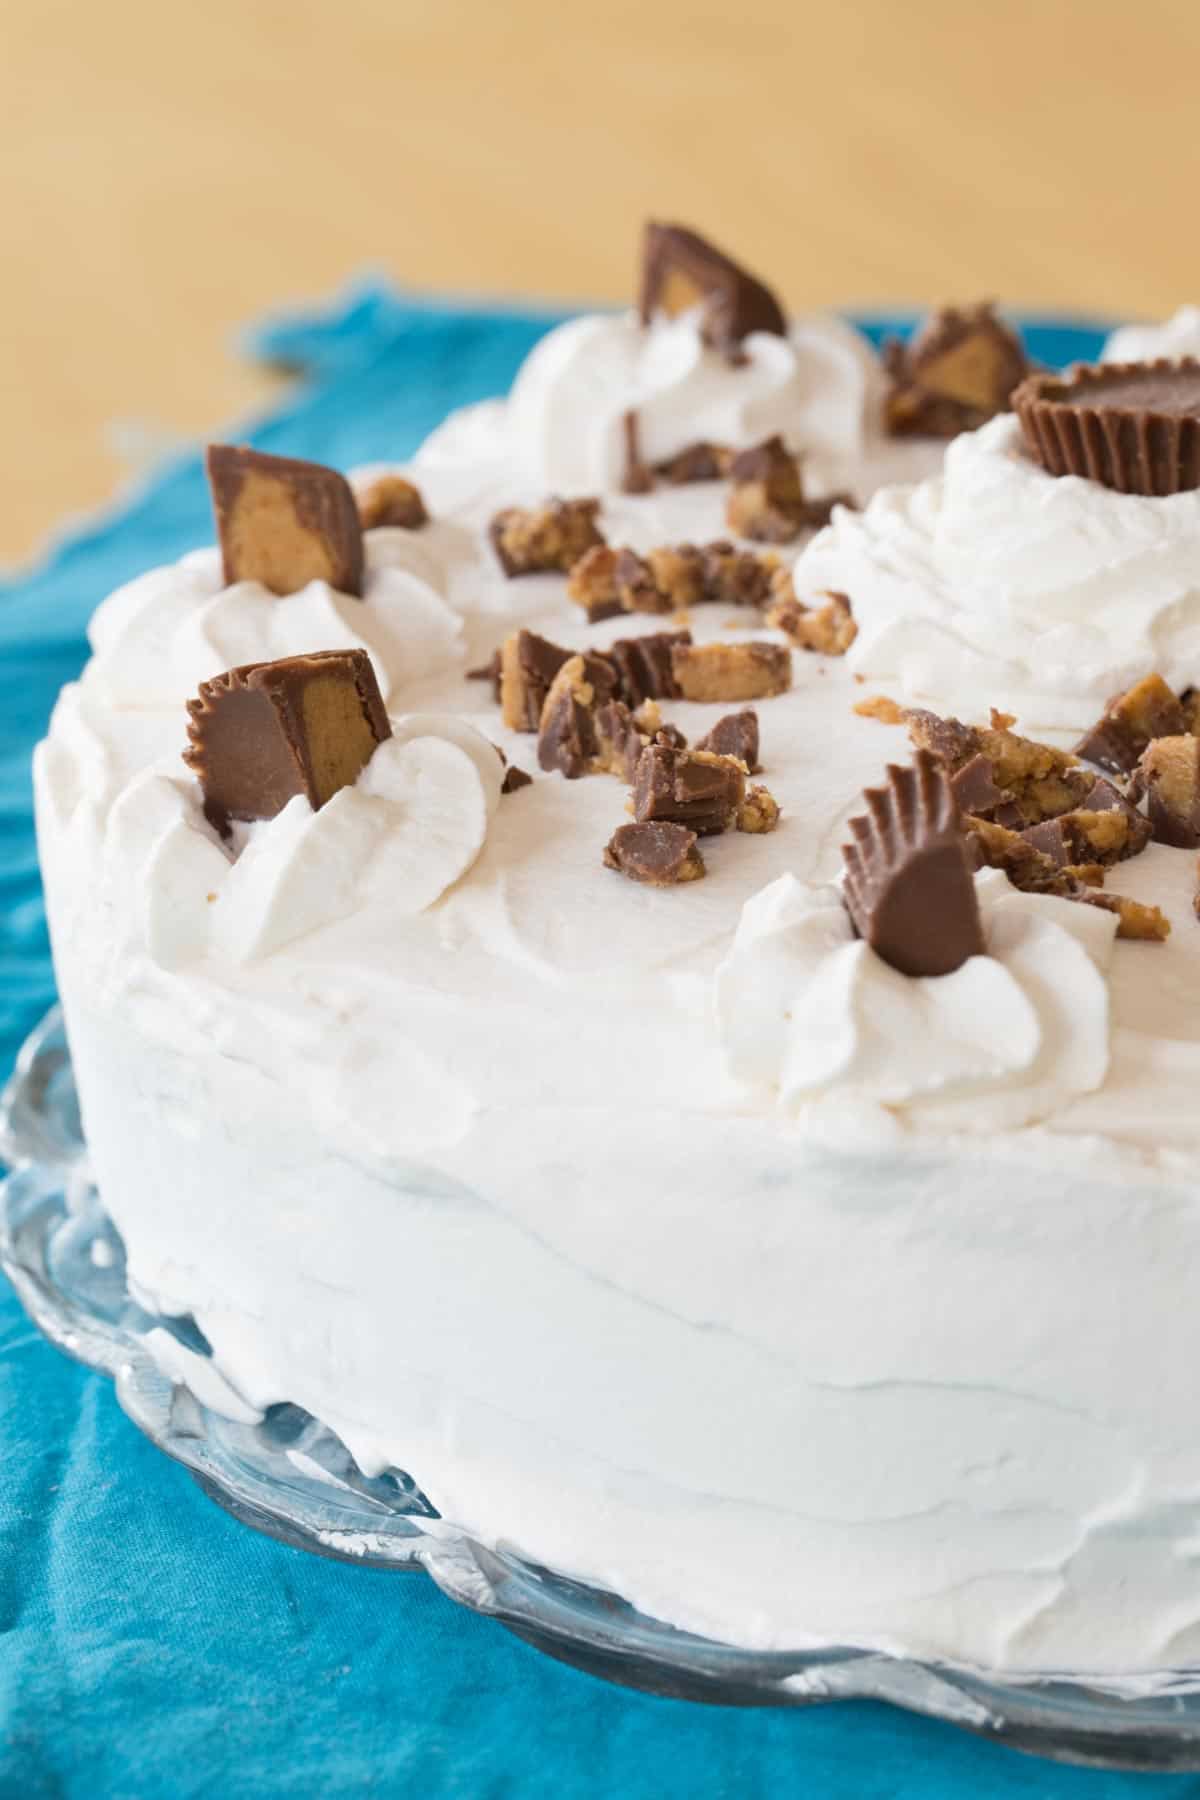 An ice cream cake slathered in whipped cream topping and studded with Reese's peanut butter cups.